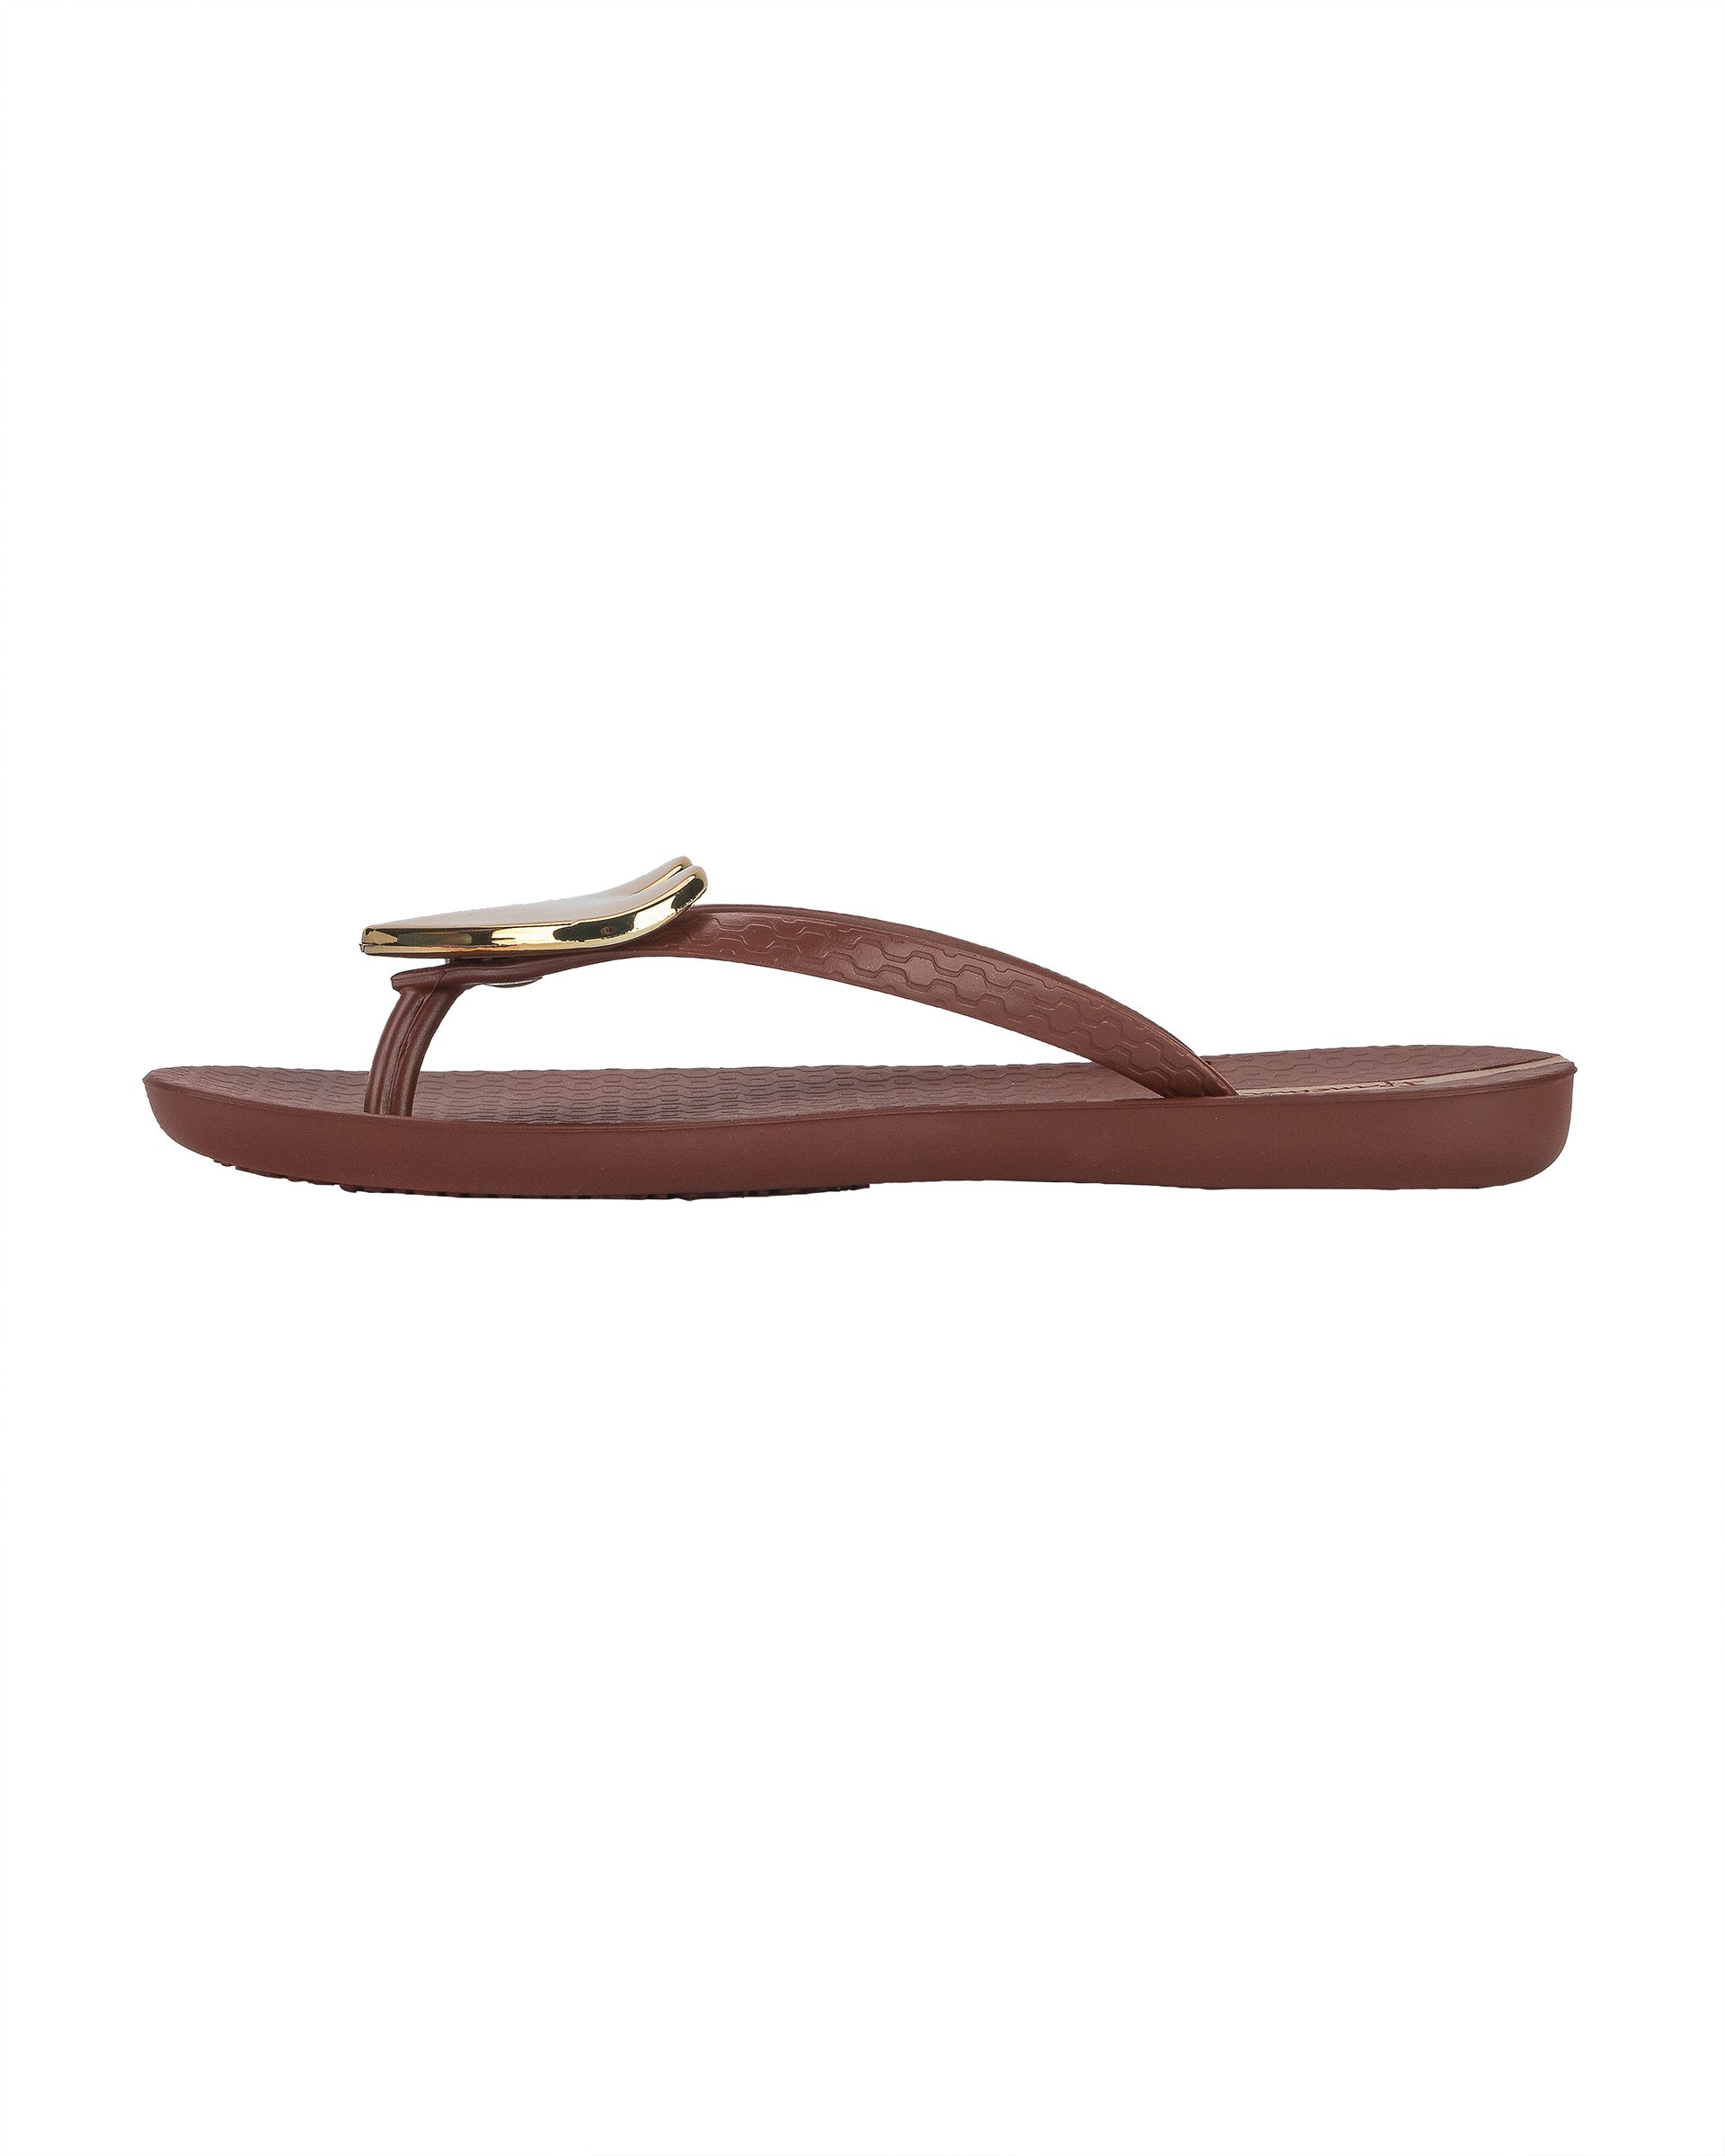 Inner side view of a brown Ipanema Wave Heart women's flip flop with gold heart.